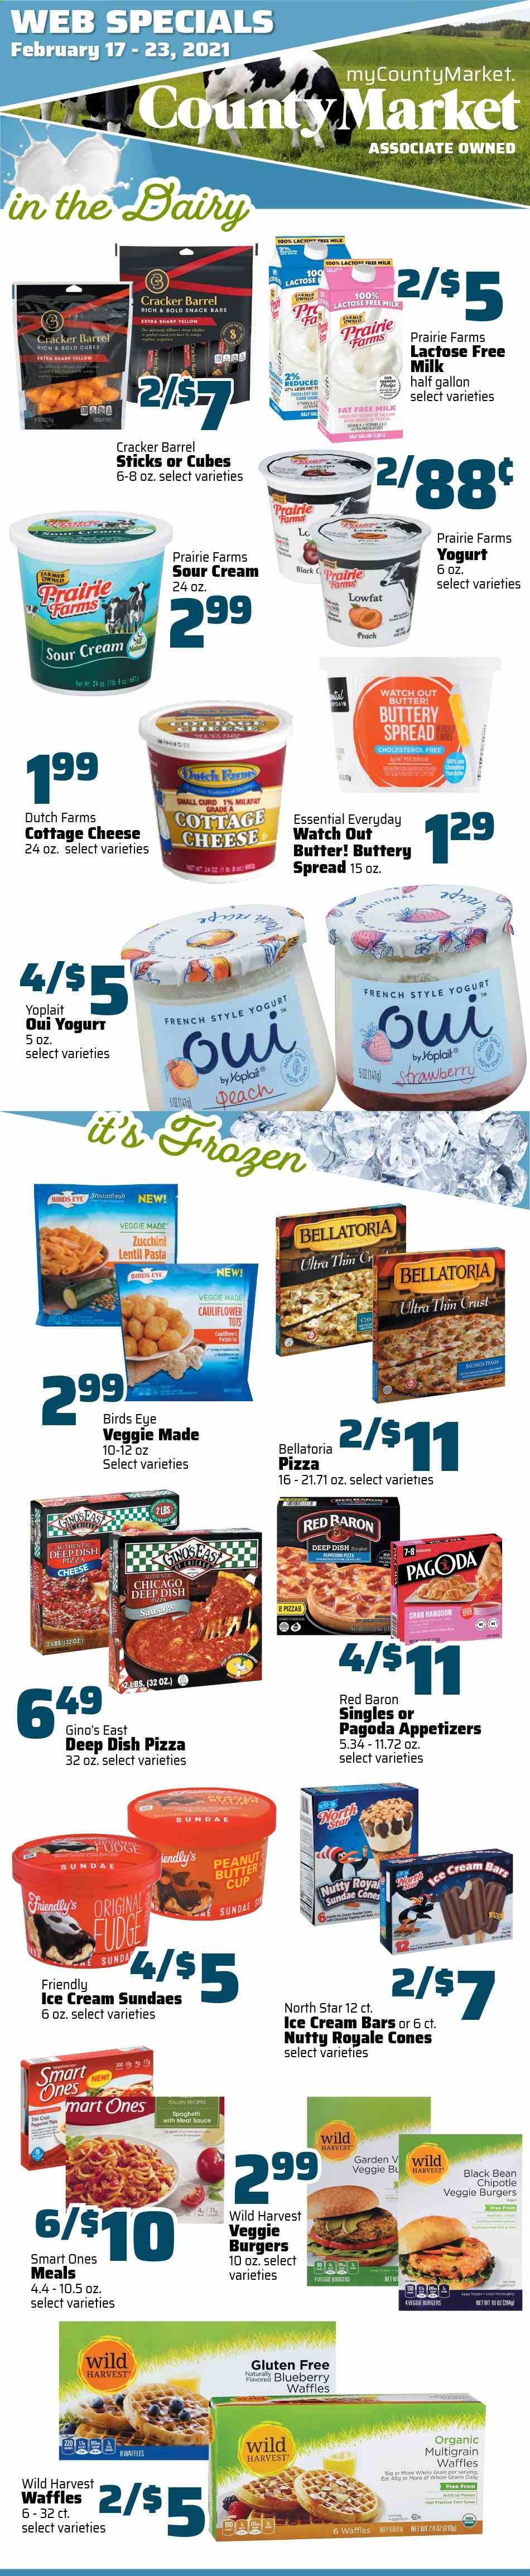 thumbnail - County Market Flyer - 02/17/2021 - 02/23/2021 - Sales products - zucchini, waffles, crab, pizza, hamburger, sauce, Bird's Eye, veggie burger, sausage, pepperoni, cottage cheese, cheese, Yoplait, yoghurt, lactose free milk, milk, buttery spread, sour cream, ice cream, ice cream bars, cauliflower, beans, corn, Red Baron, Bellatoria, crackers, peanut butter cups, Wild Harvest, fudge, snack bar, snack, pasta, spaghetti, corn syrup, syrup, peanut butter, Sol. Page 1.